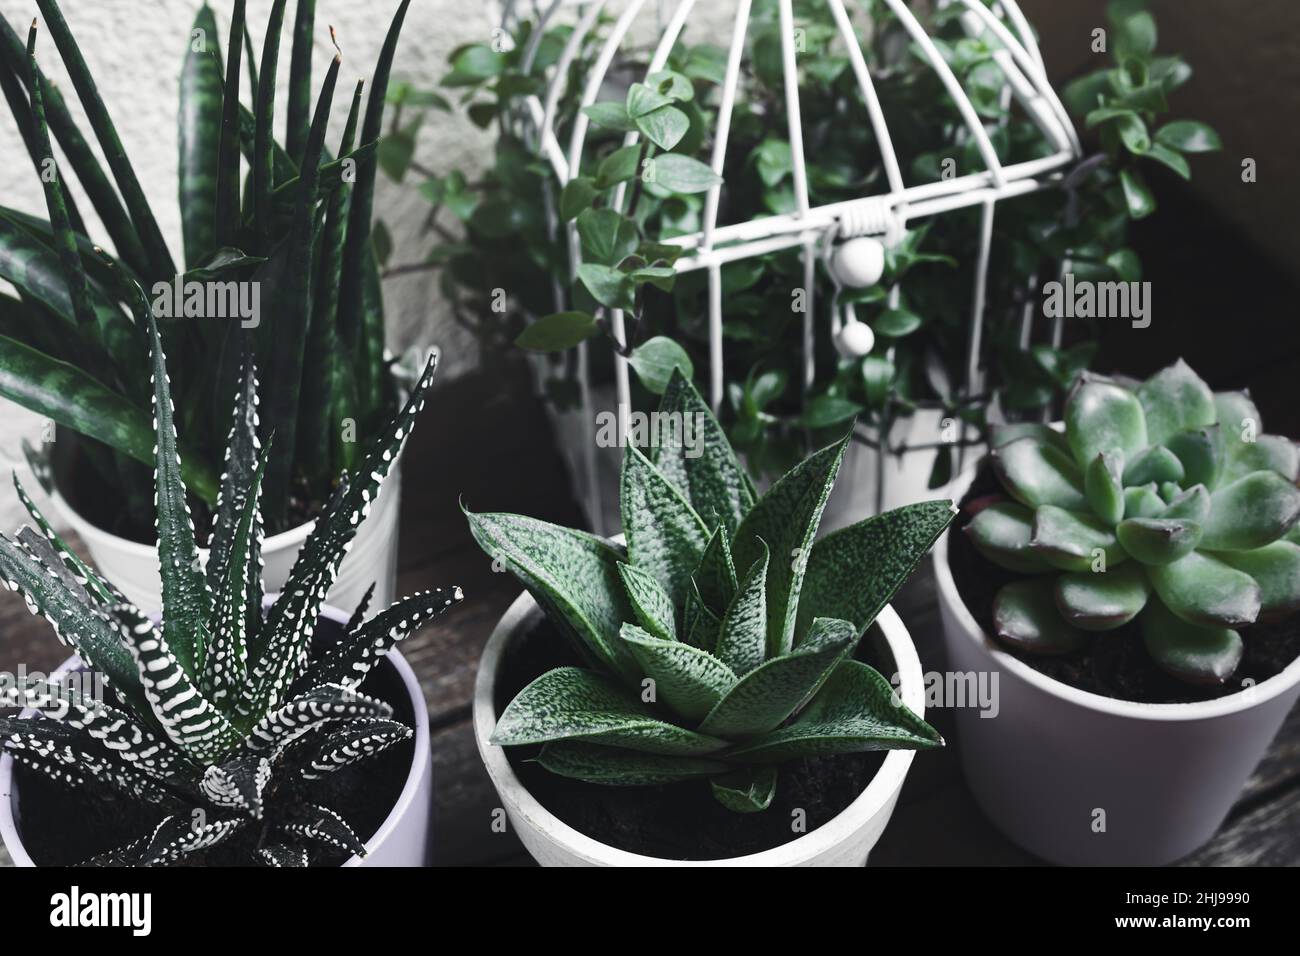 Different succulent home plants: haworthia, echeveria, gasteria, sansevieria fernwood and callisia - home gardening and connecting with nature concept Stock Photo